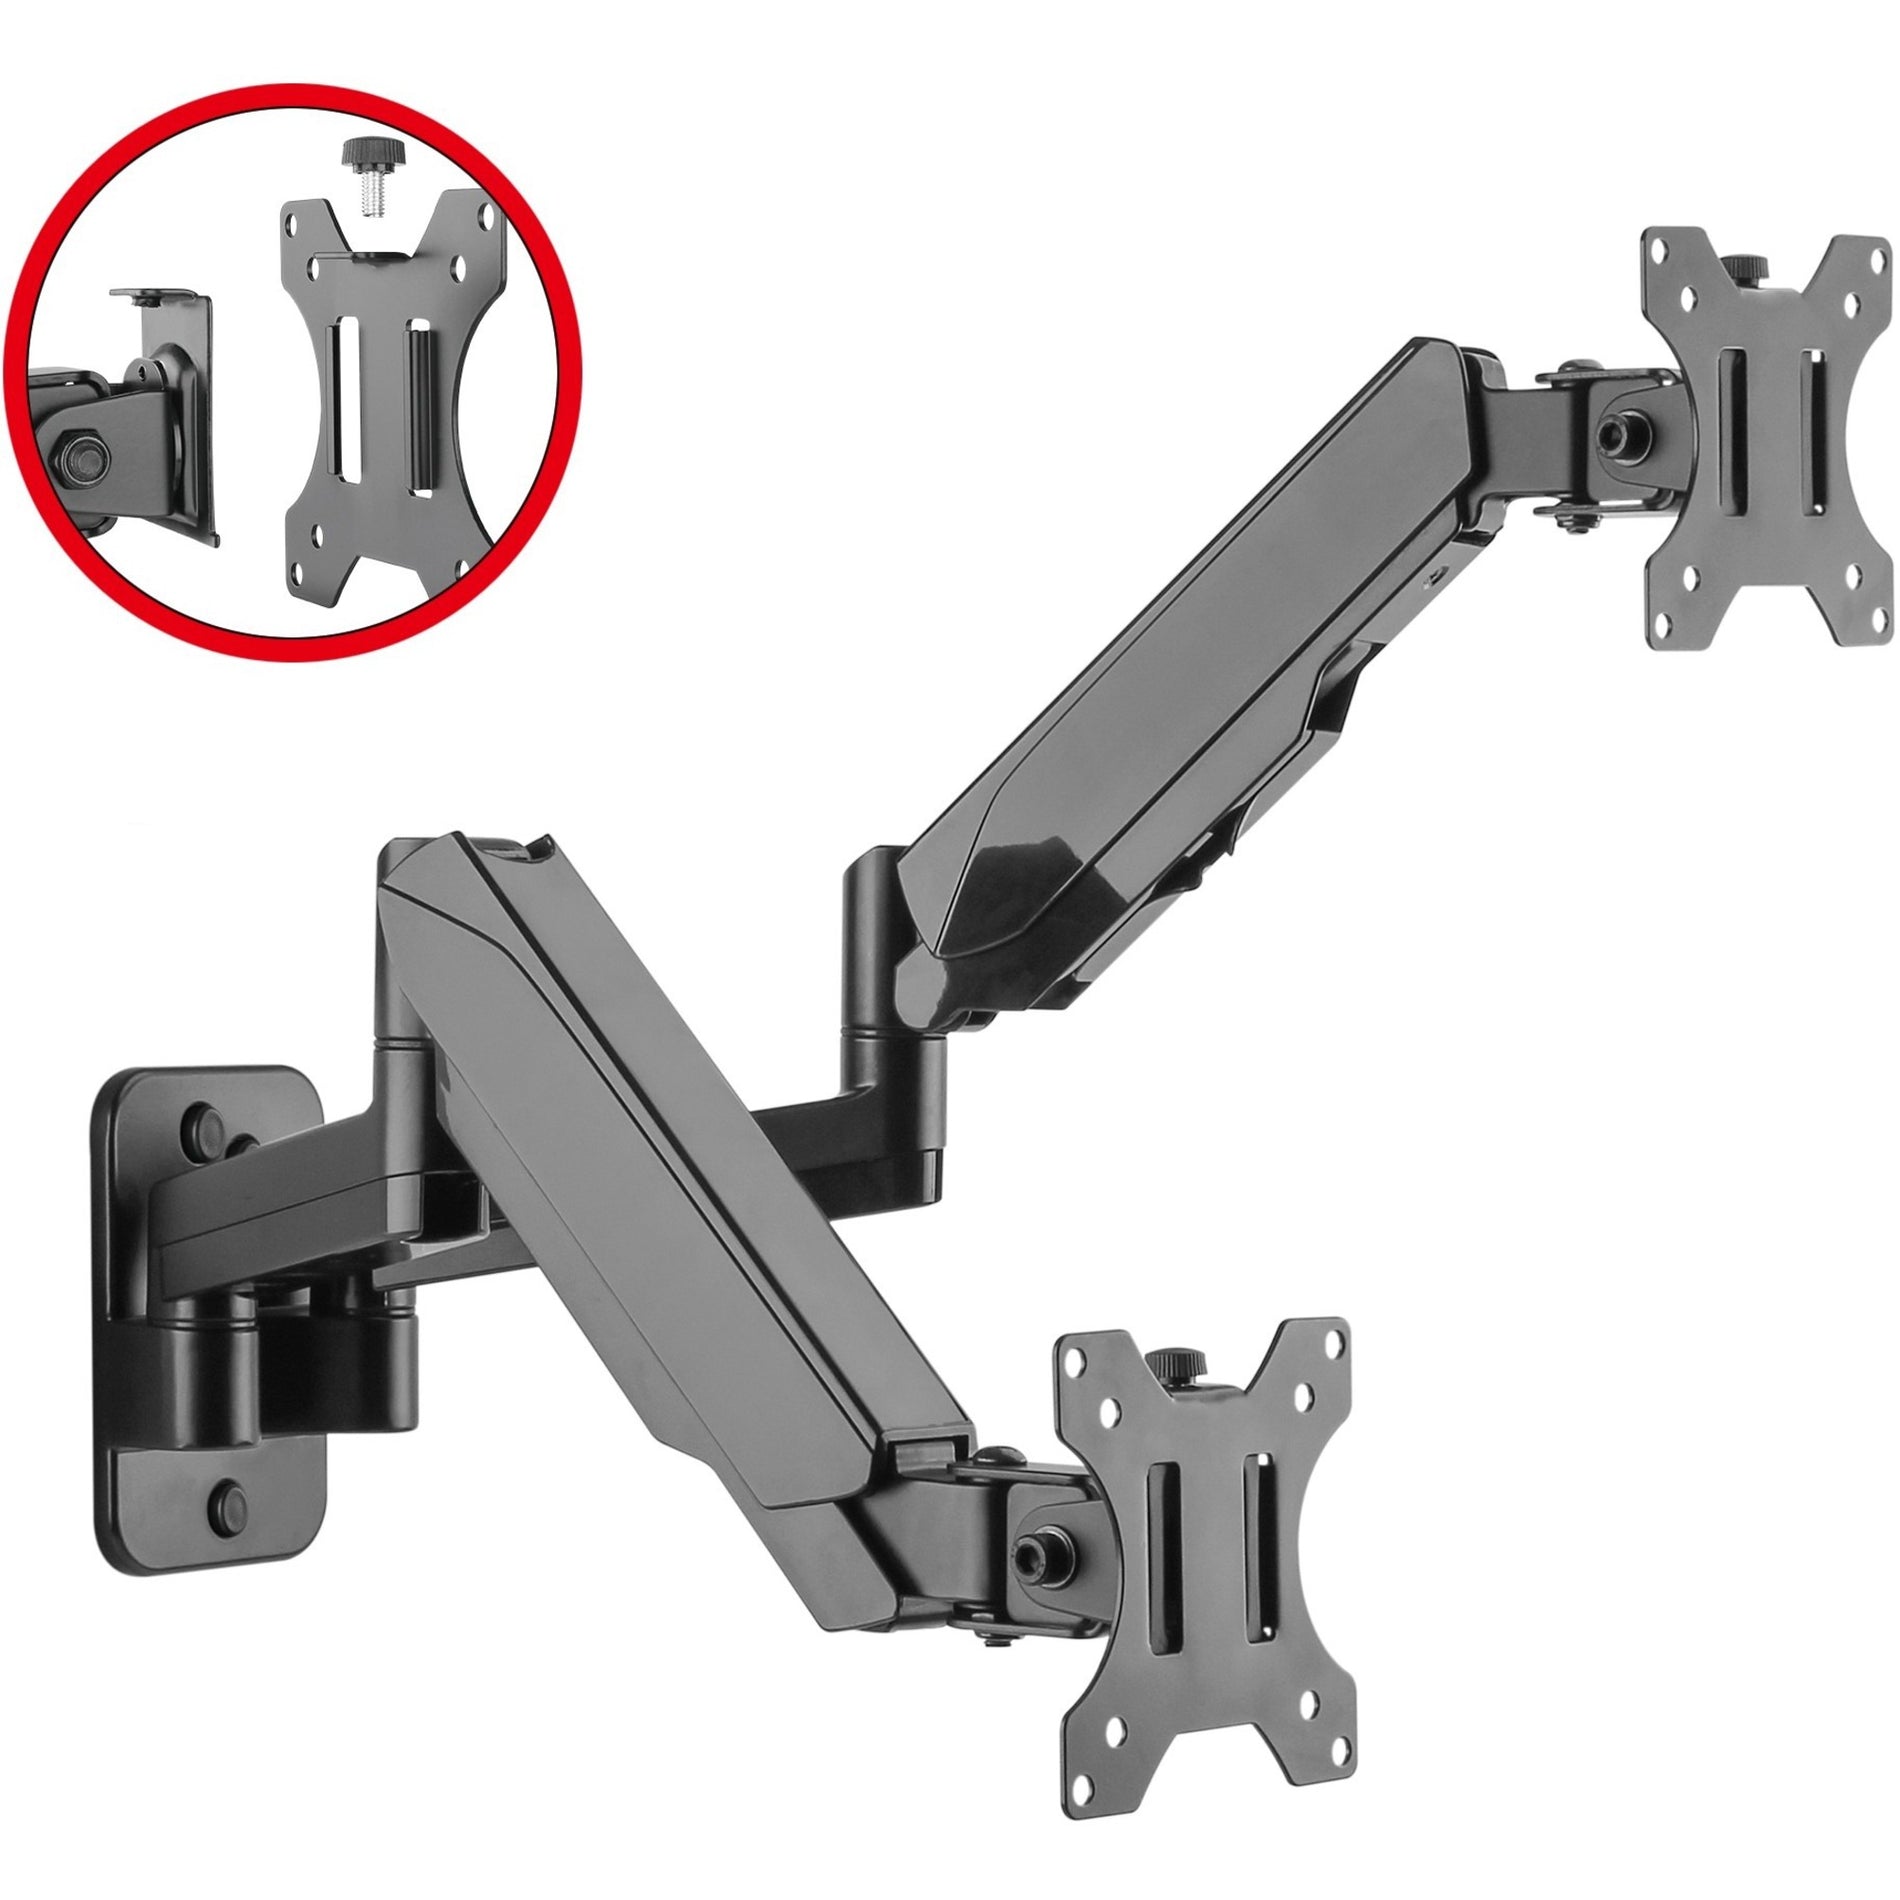 SIIG CE-MT2M12-S1 High Premium Aluminum Gas Spring Wall Mount - Dual Monitor, Easily Adjust Height and Angle for Ergonomic Workspace